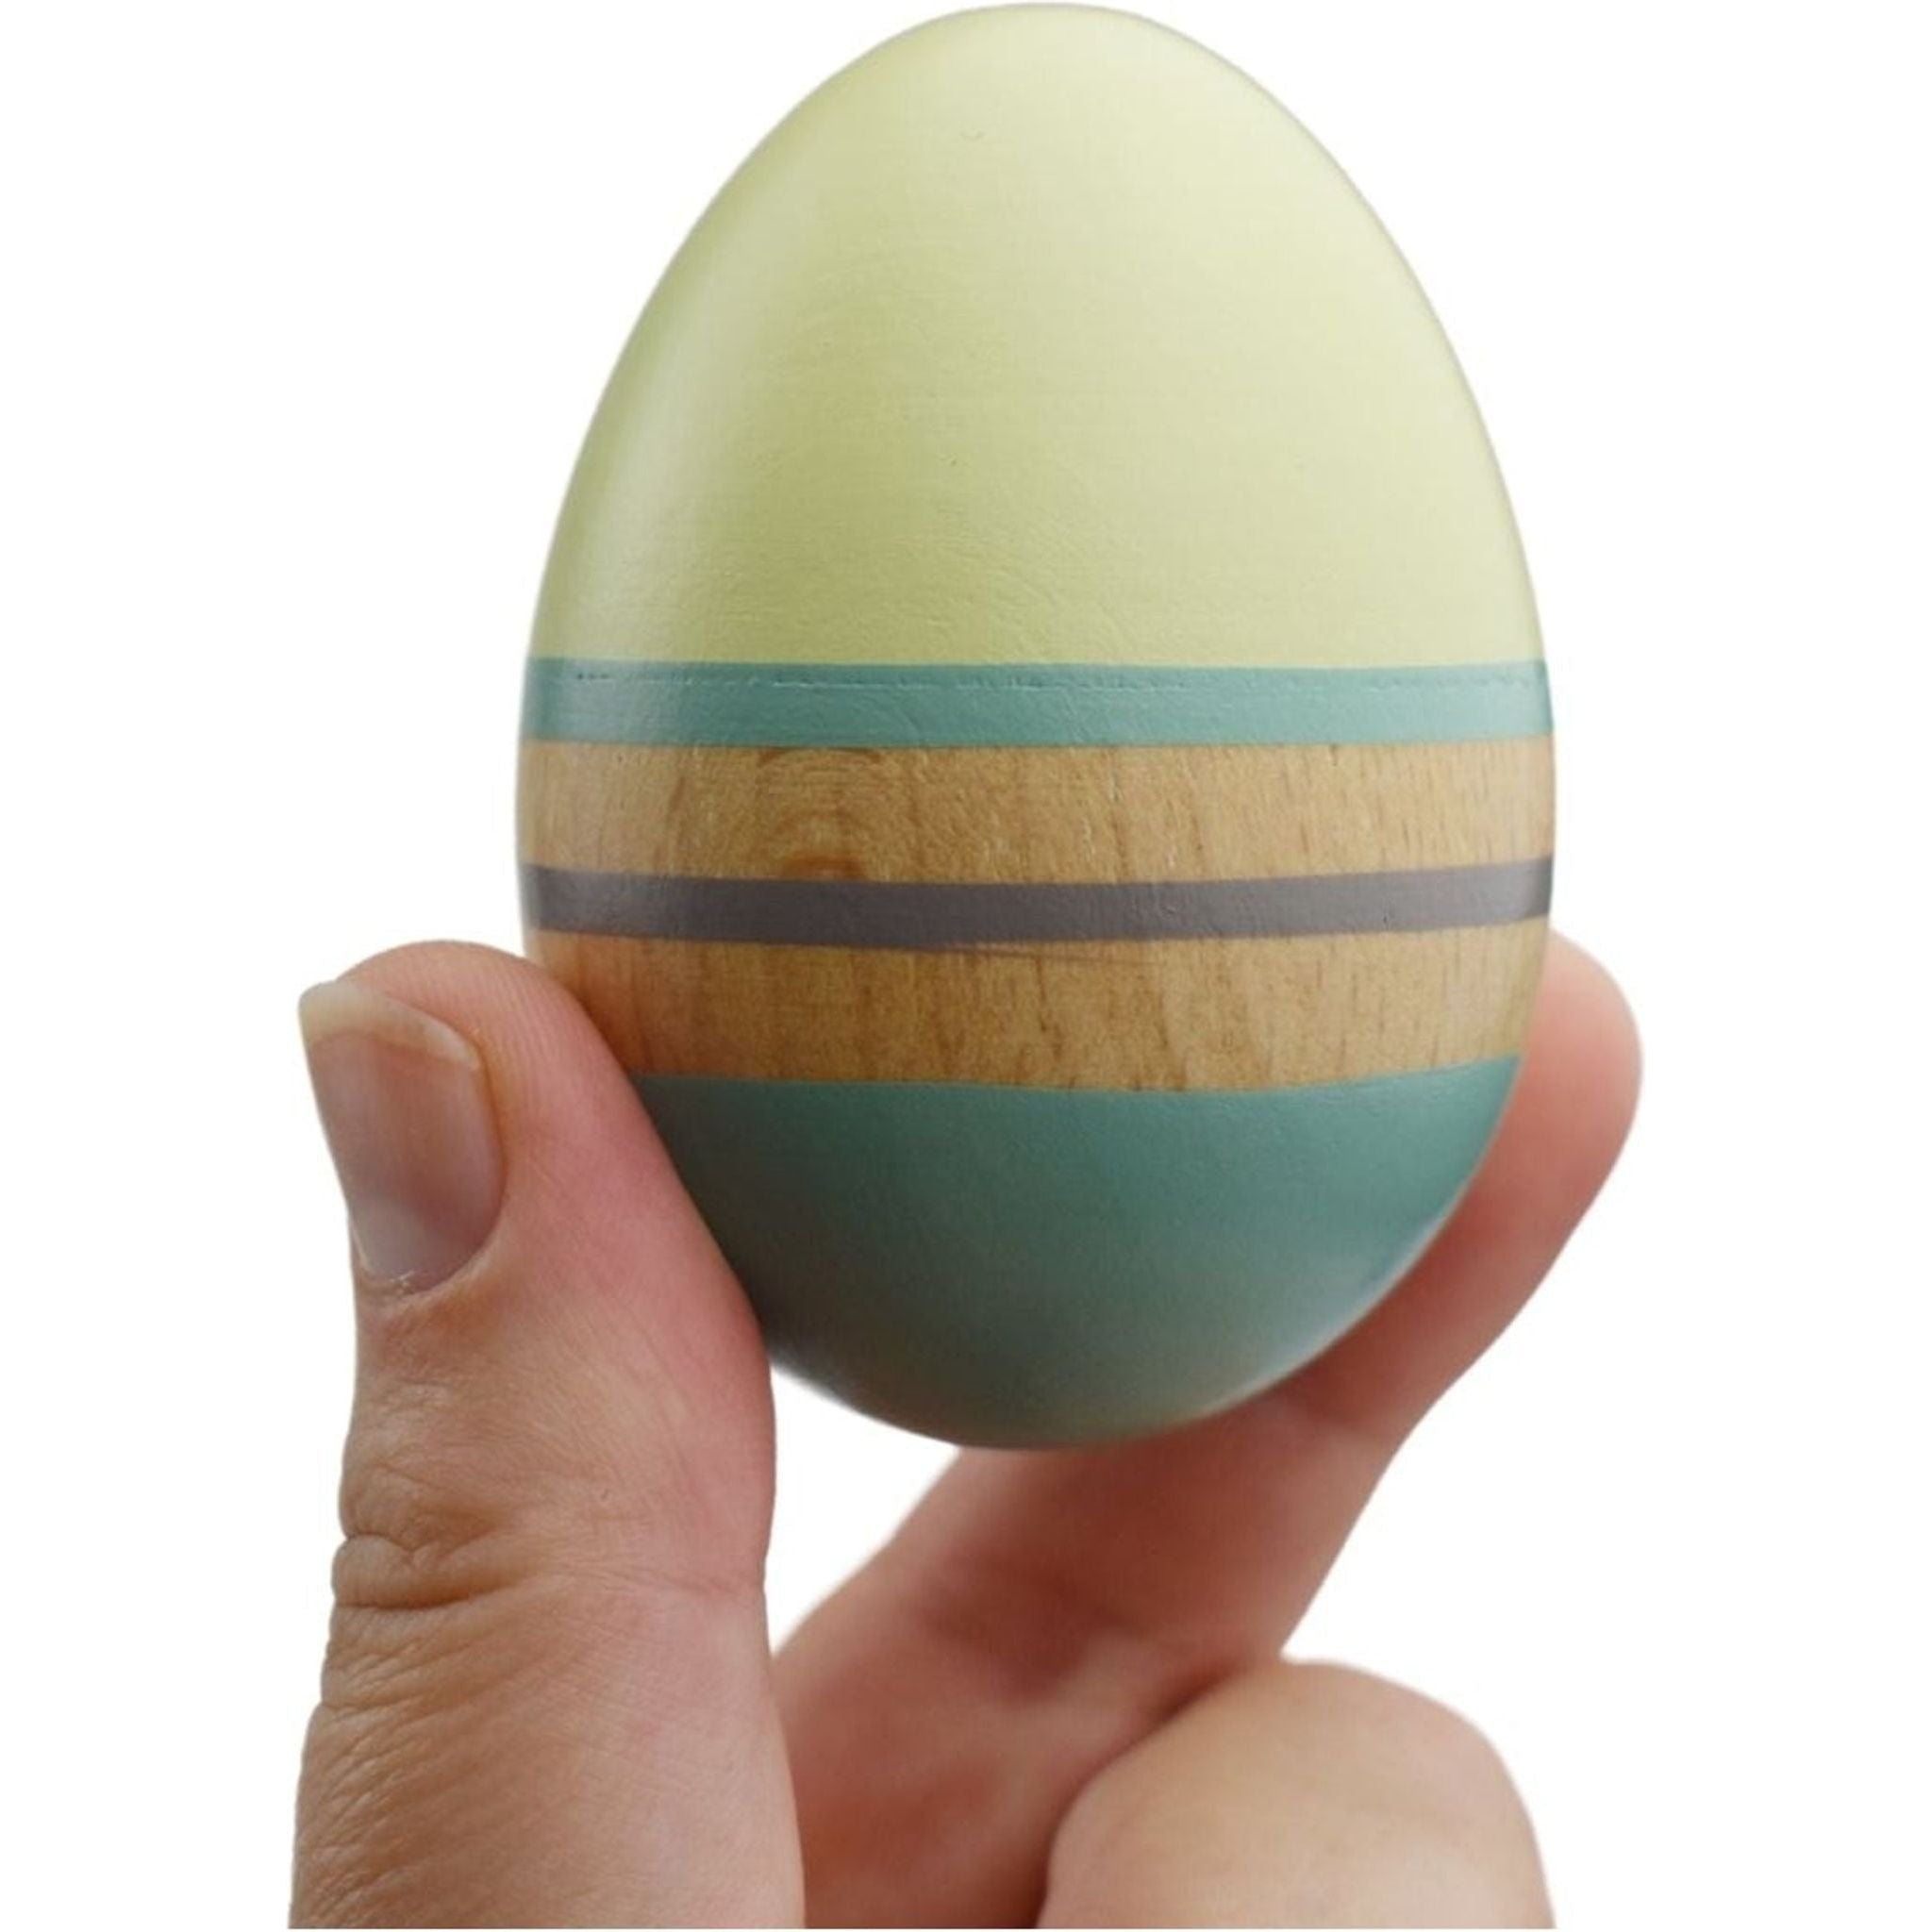 Calm & Breezy Wooden Egg Shaker - Toybox Tales